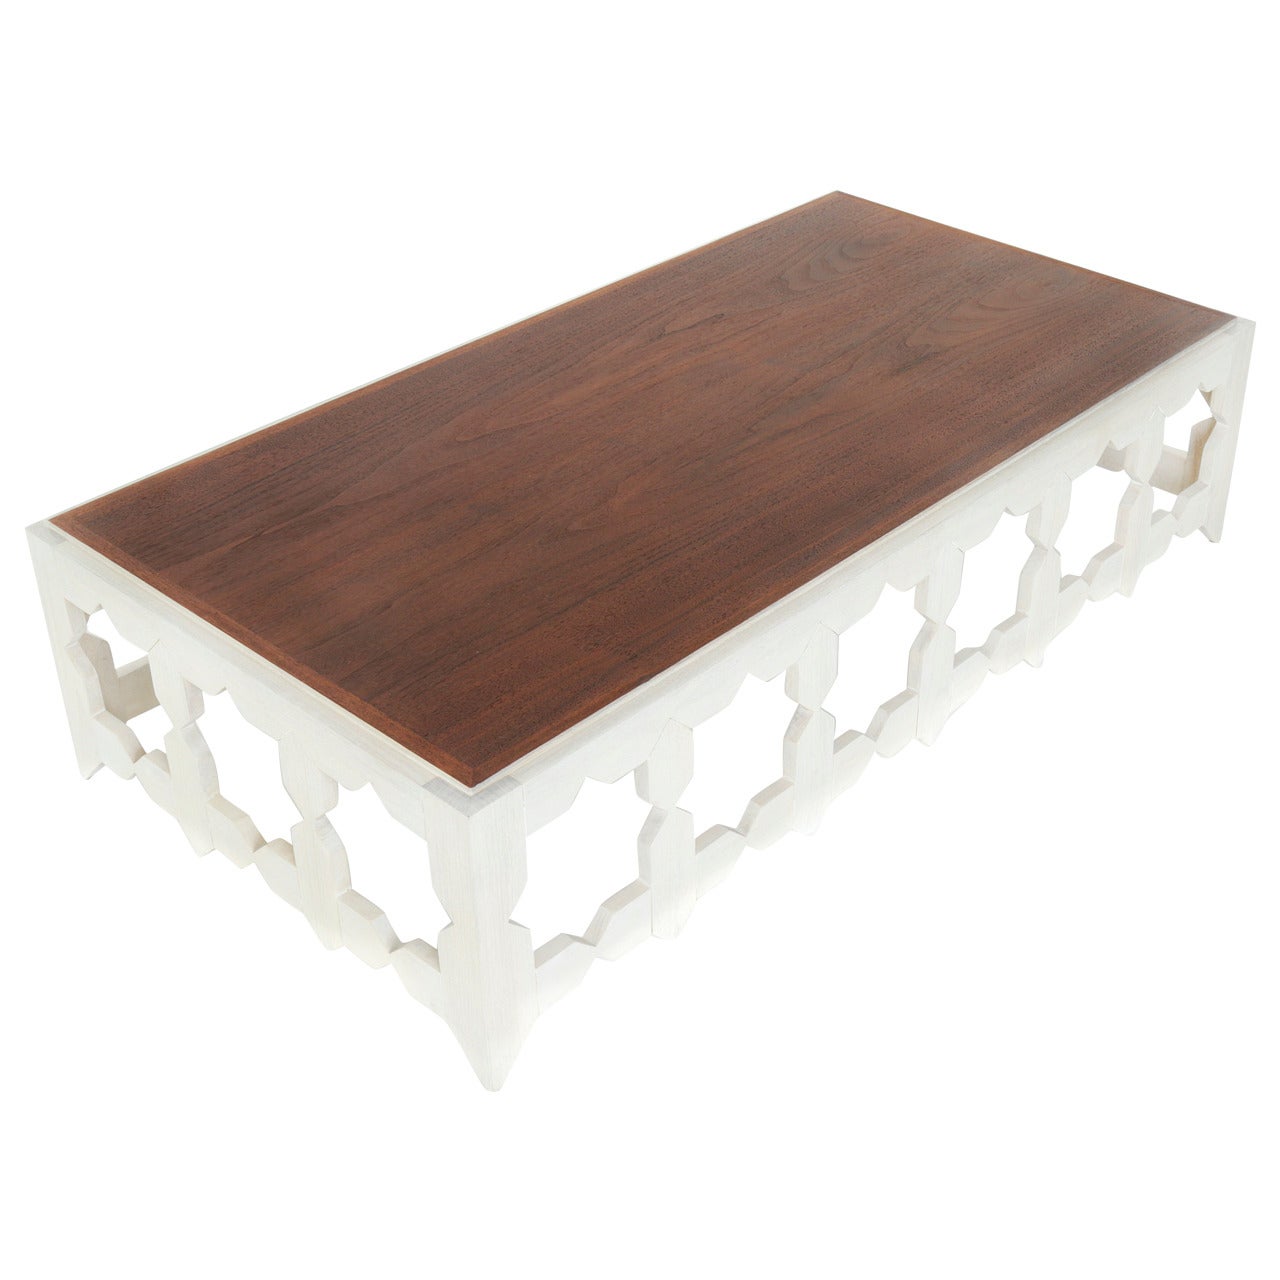 Rectangular Walnut Coffee Table with Star Cut-Outs